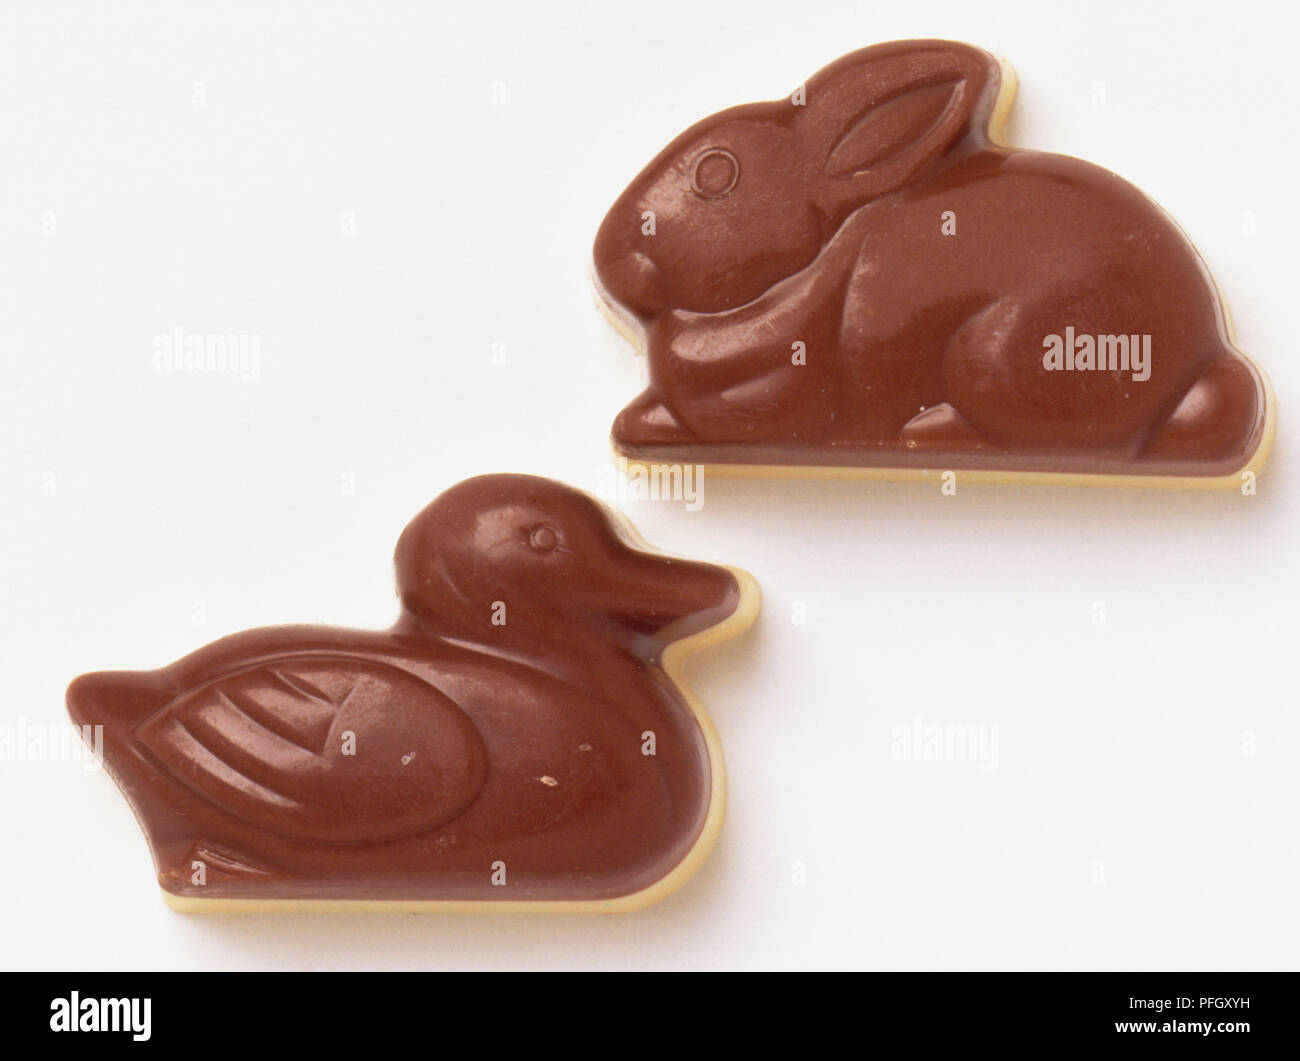 Two chocolate animals. A bunny and a duck. Stock Photo